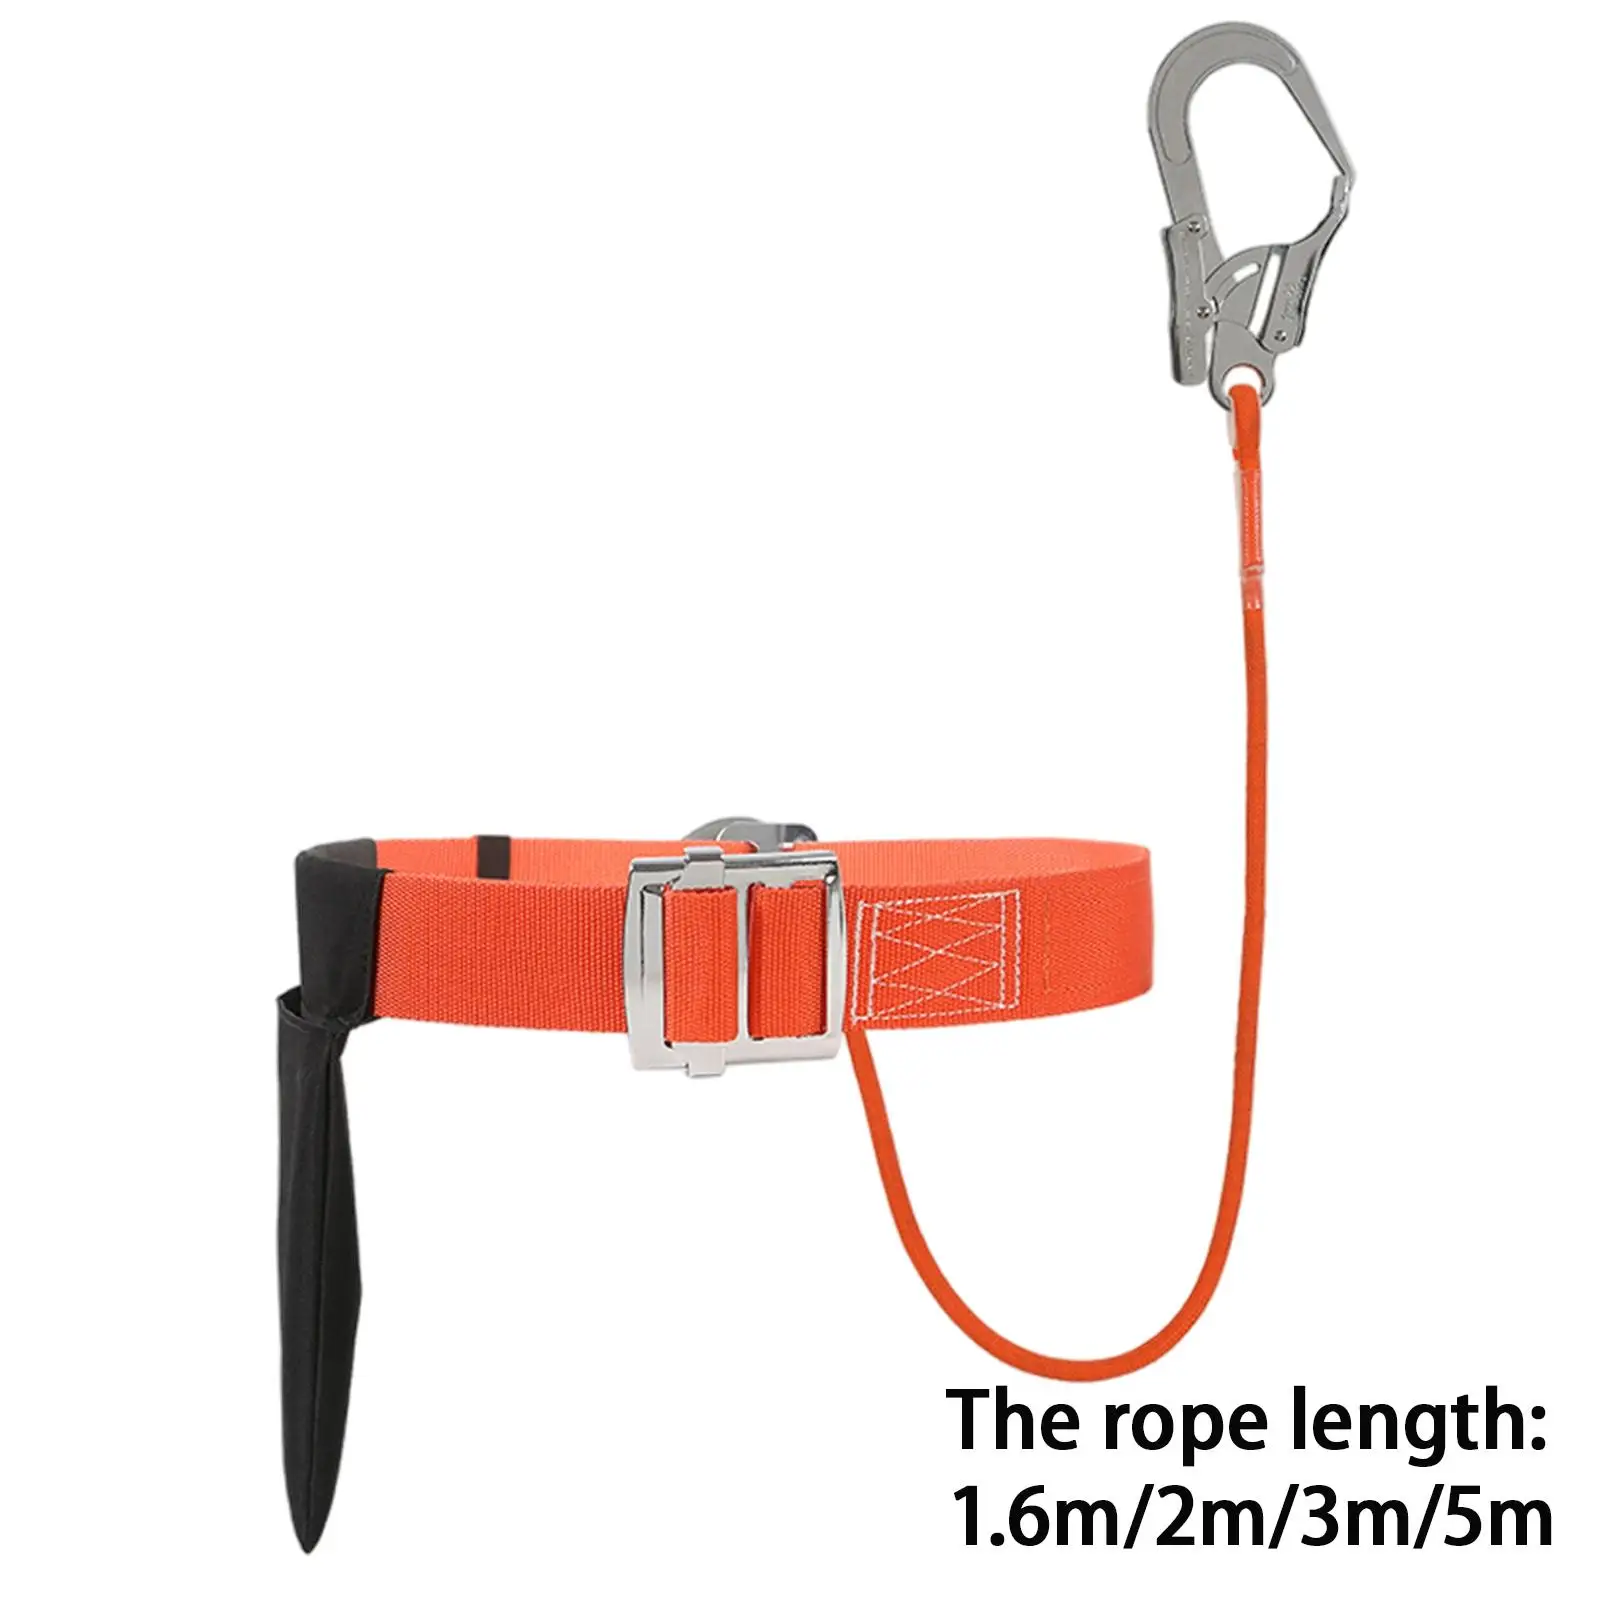 Multi-Functional Safety Belt Rope with Tool Bag, Fall Protection Fall Arrest Kit